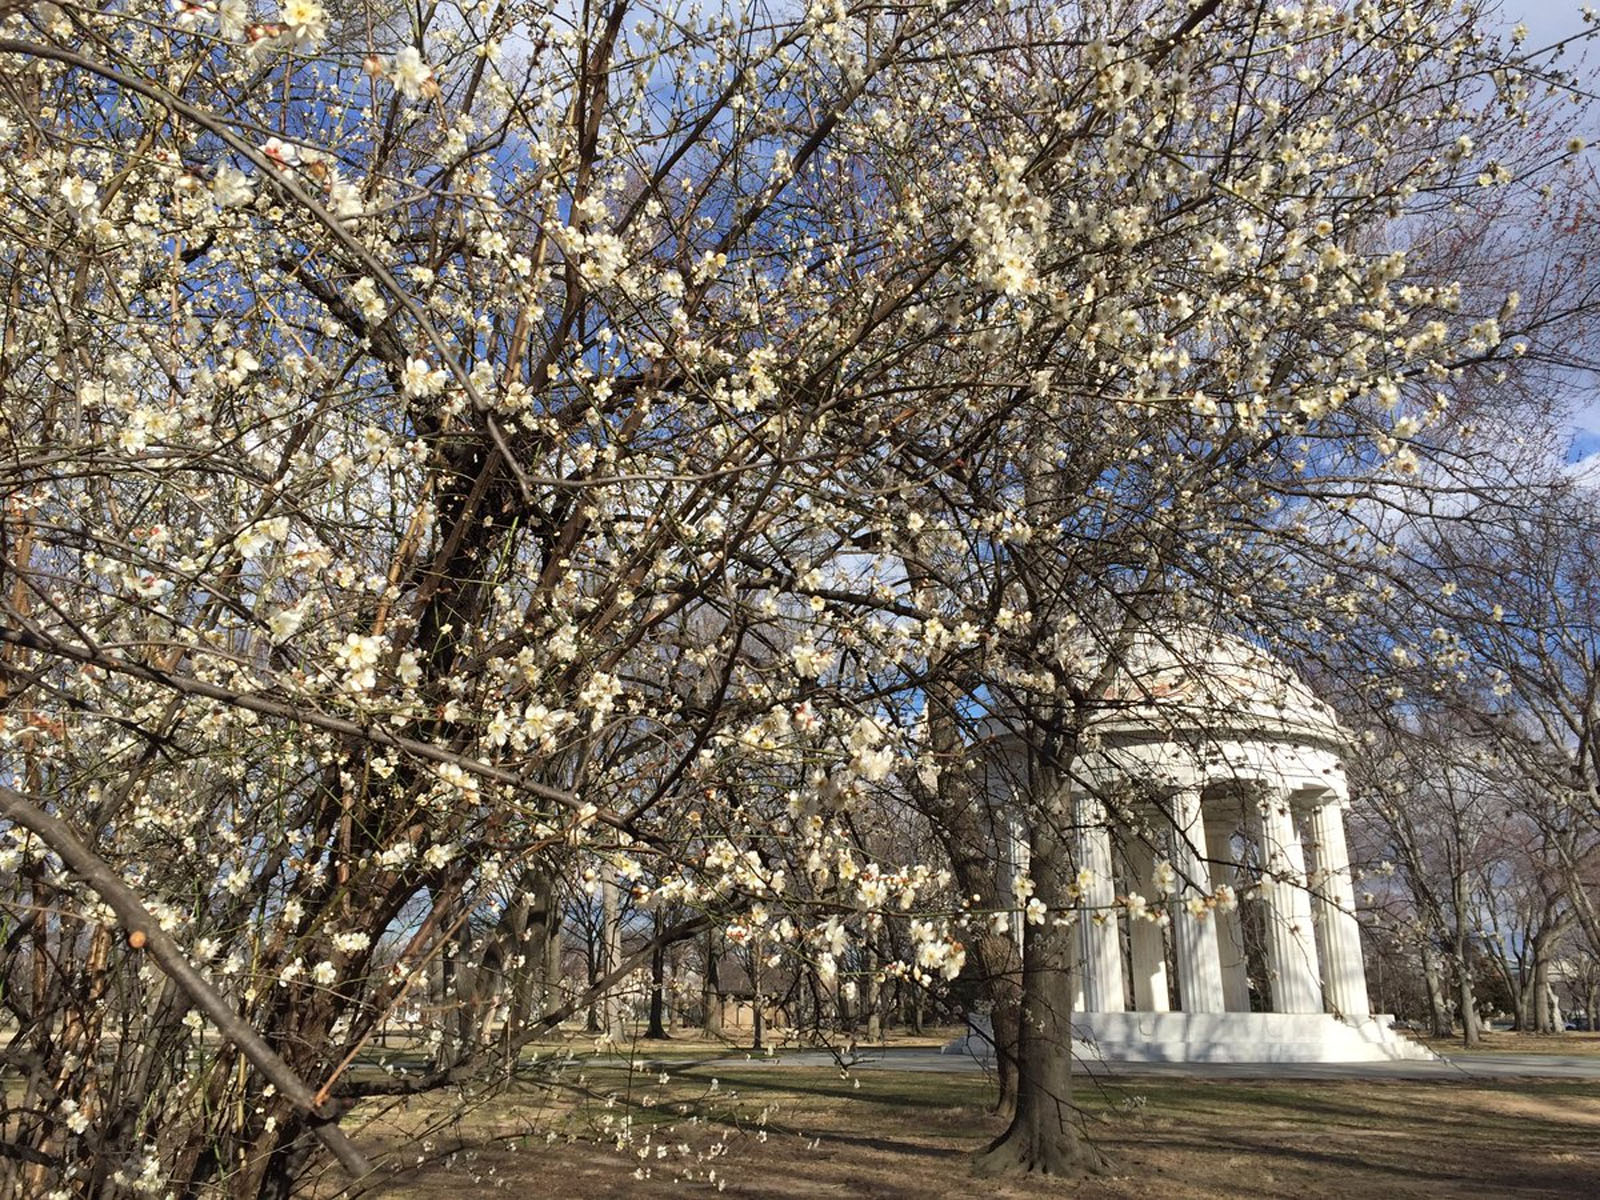 Don't be fooled by a bunch of trees with white and pink blossoms on them now near the D.C. War Memorial. According to the Park Service, those are flowering apricot trees, which are typically the first trees to bloom on the National Mall every year. (WTOP/Michelle Basch)